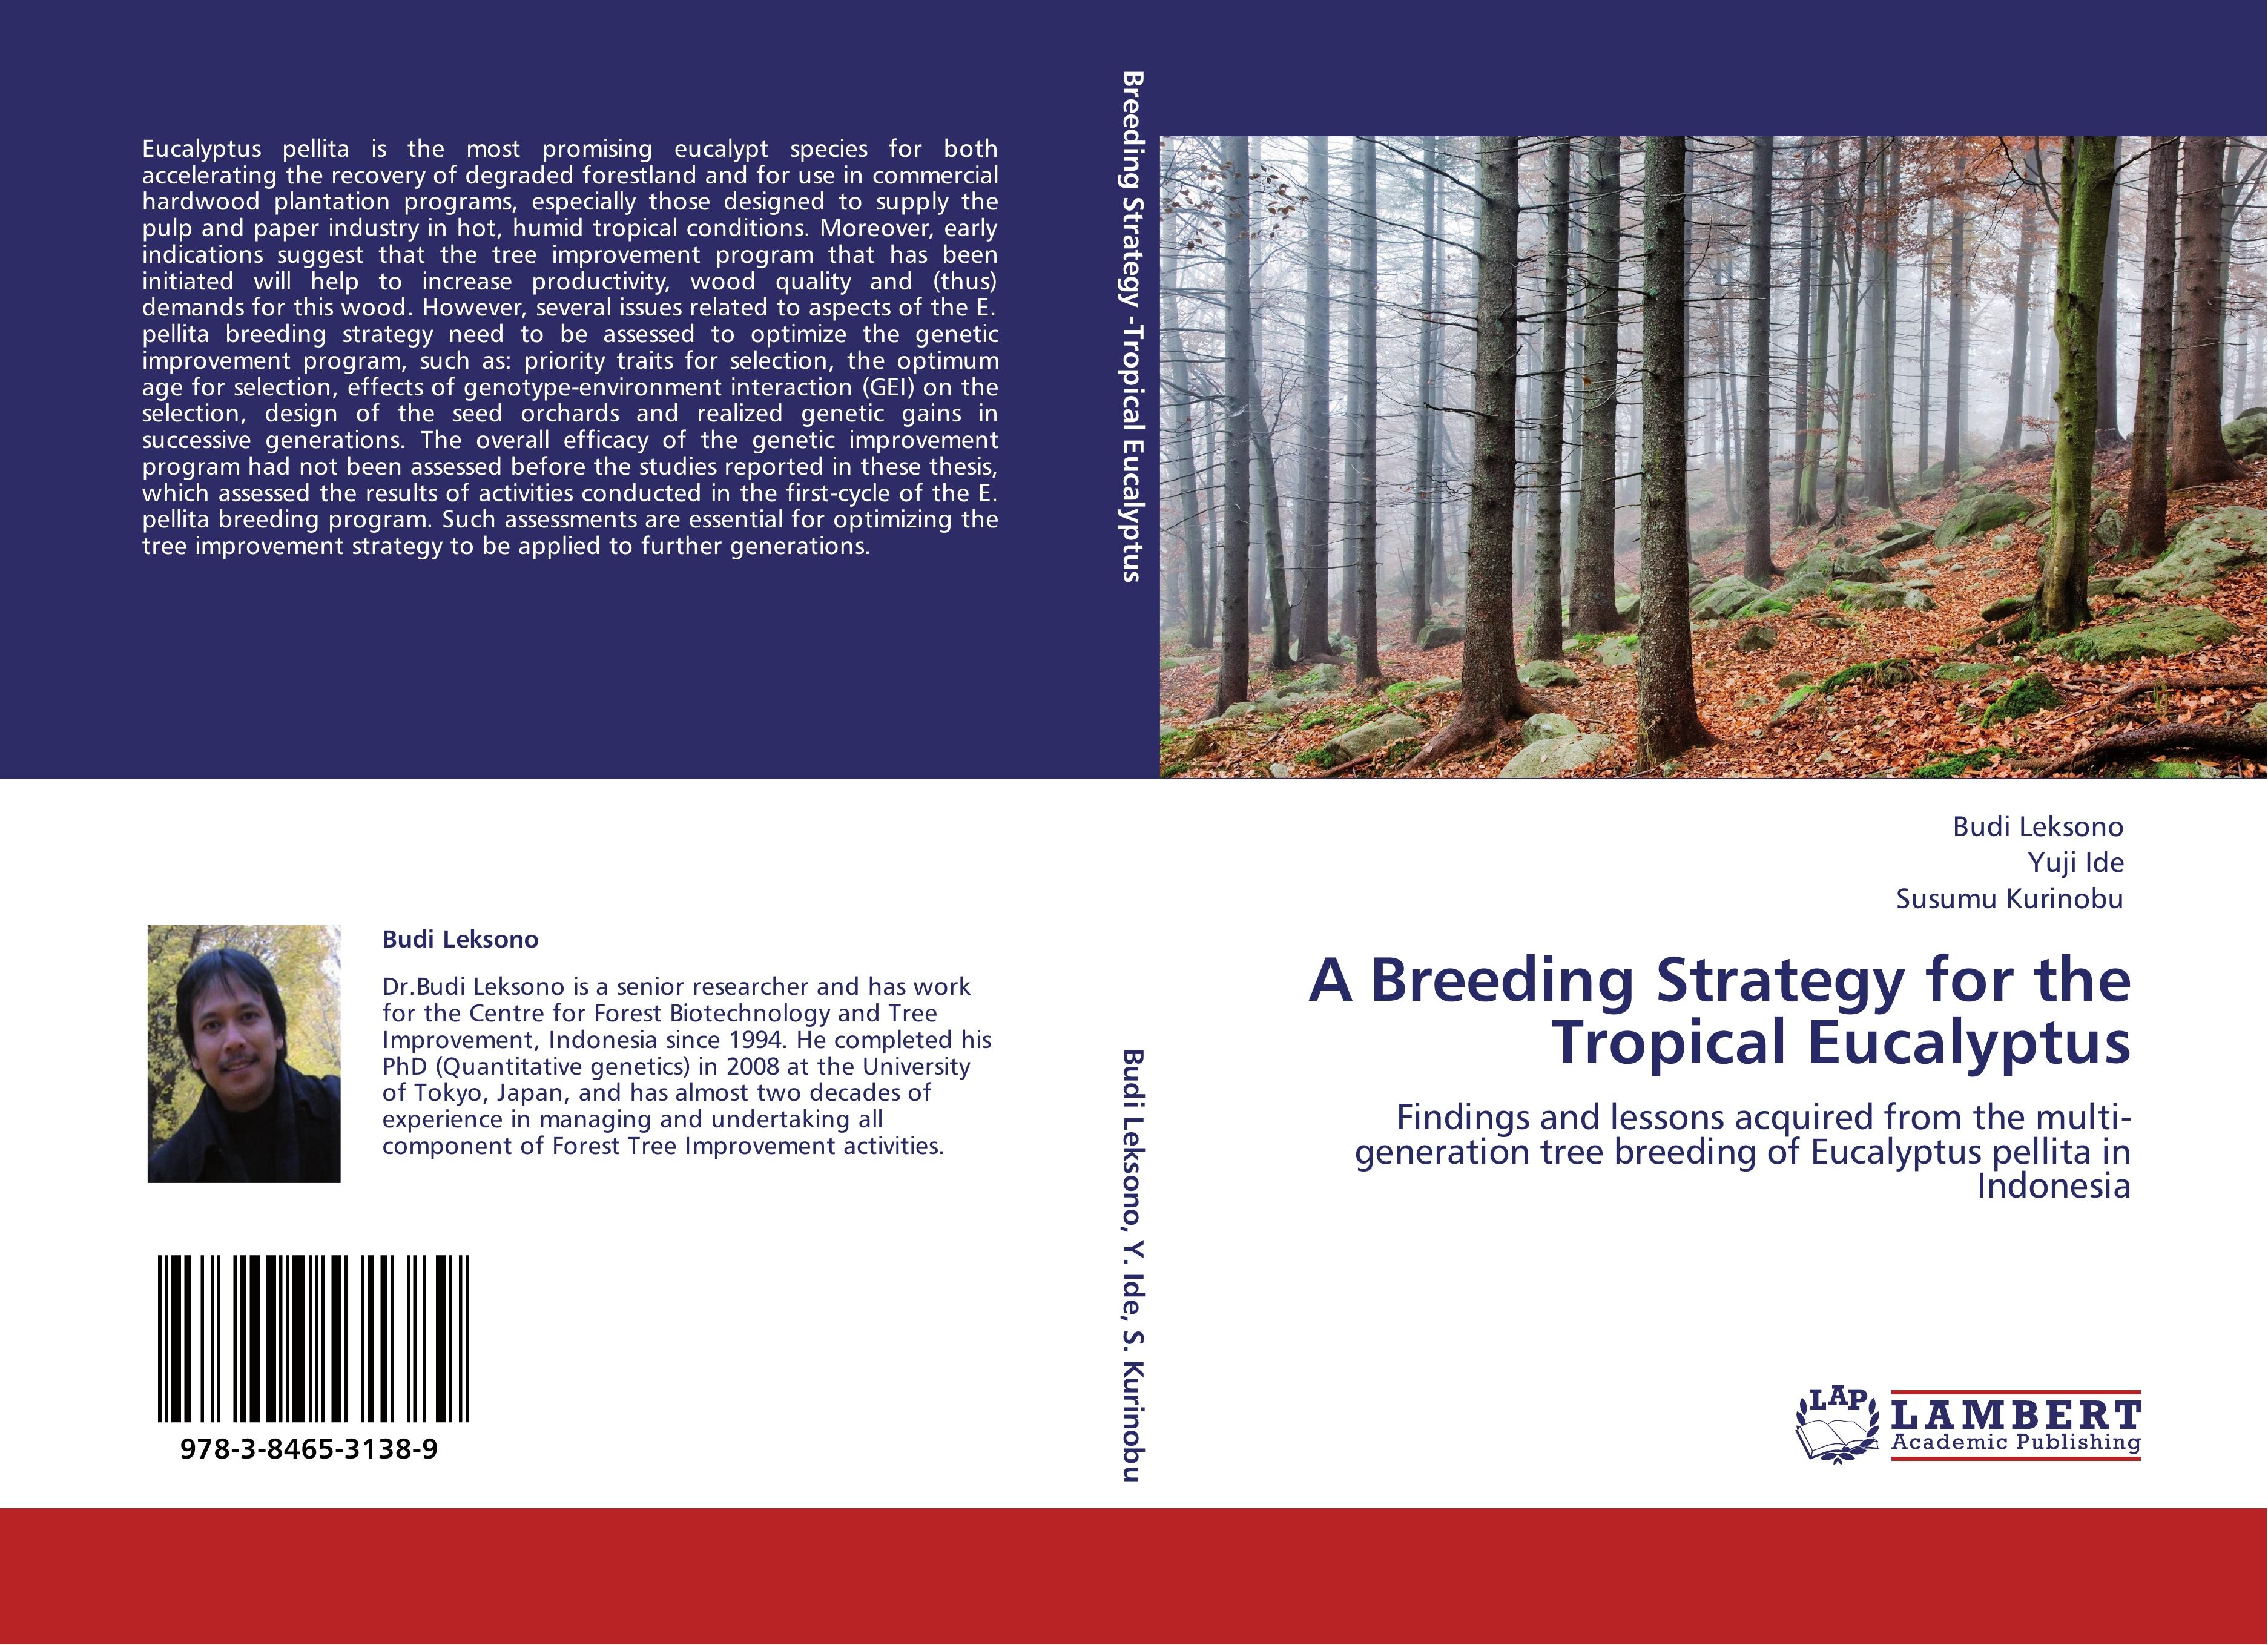 A Breeding Strategy for the Tropical Eucalyptus  Findings and lessons acquired from the multi-generation tree breeding of Eucalyptus pellita in Indonesia  Budi Leksono  Taschenbuch  Paperback - Leksono, Budi